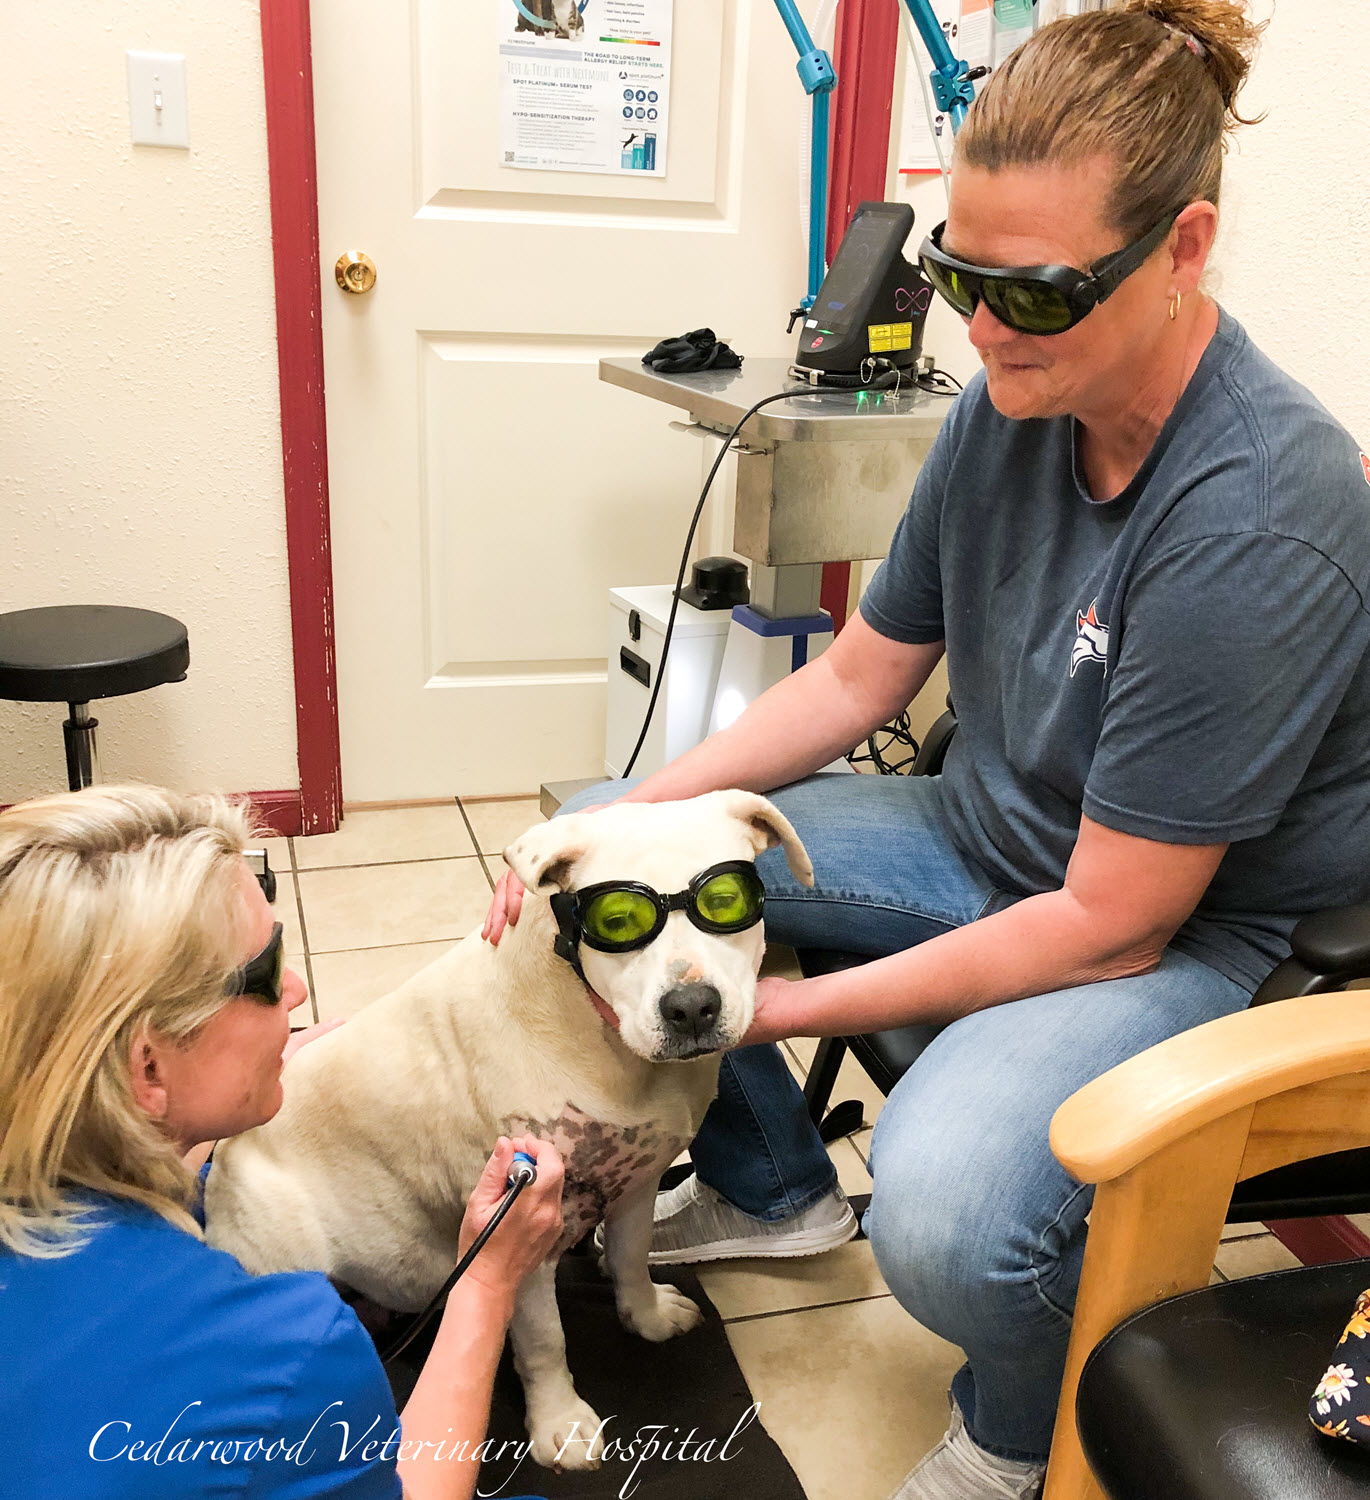 Laser Therapy to promote healing